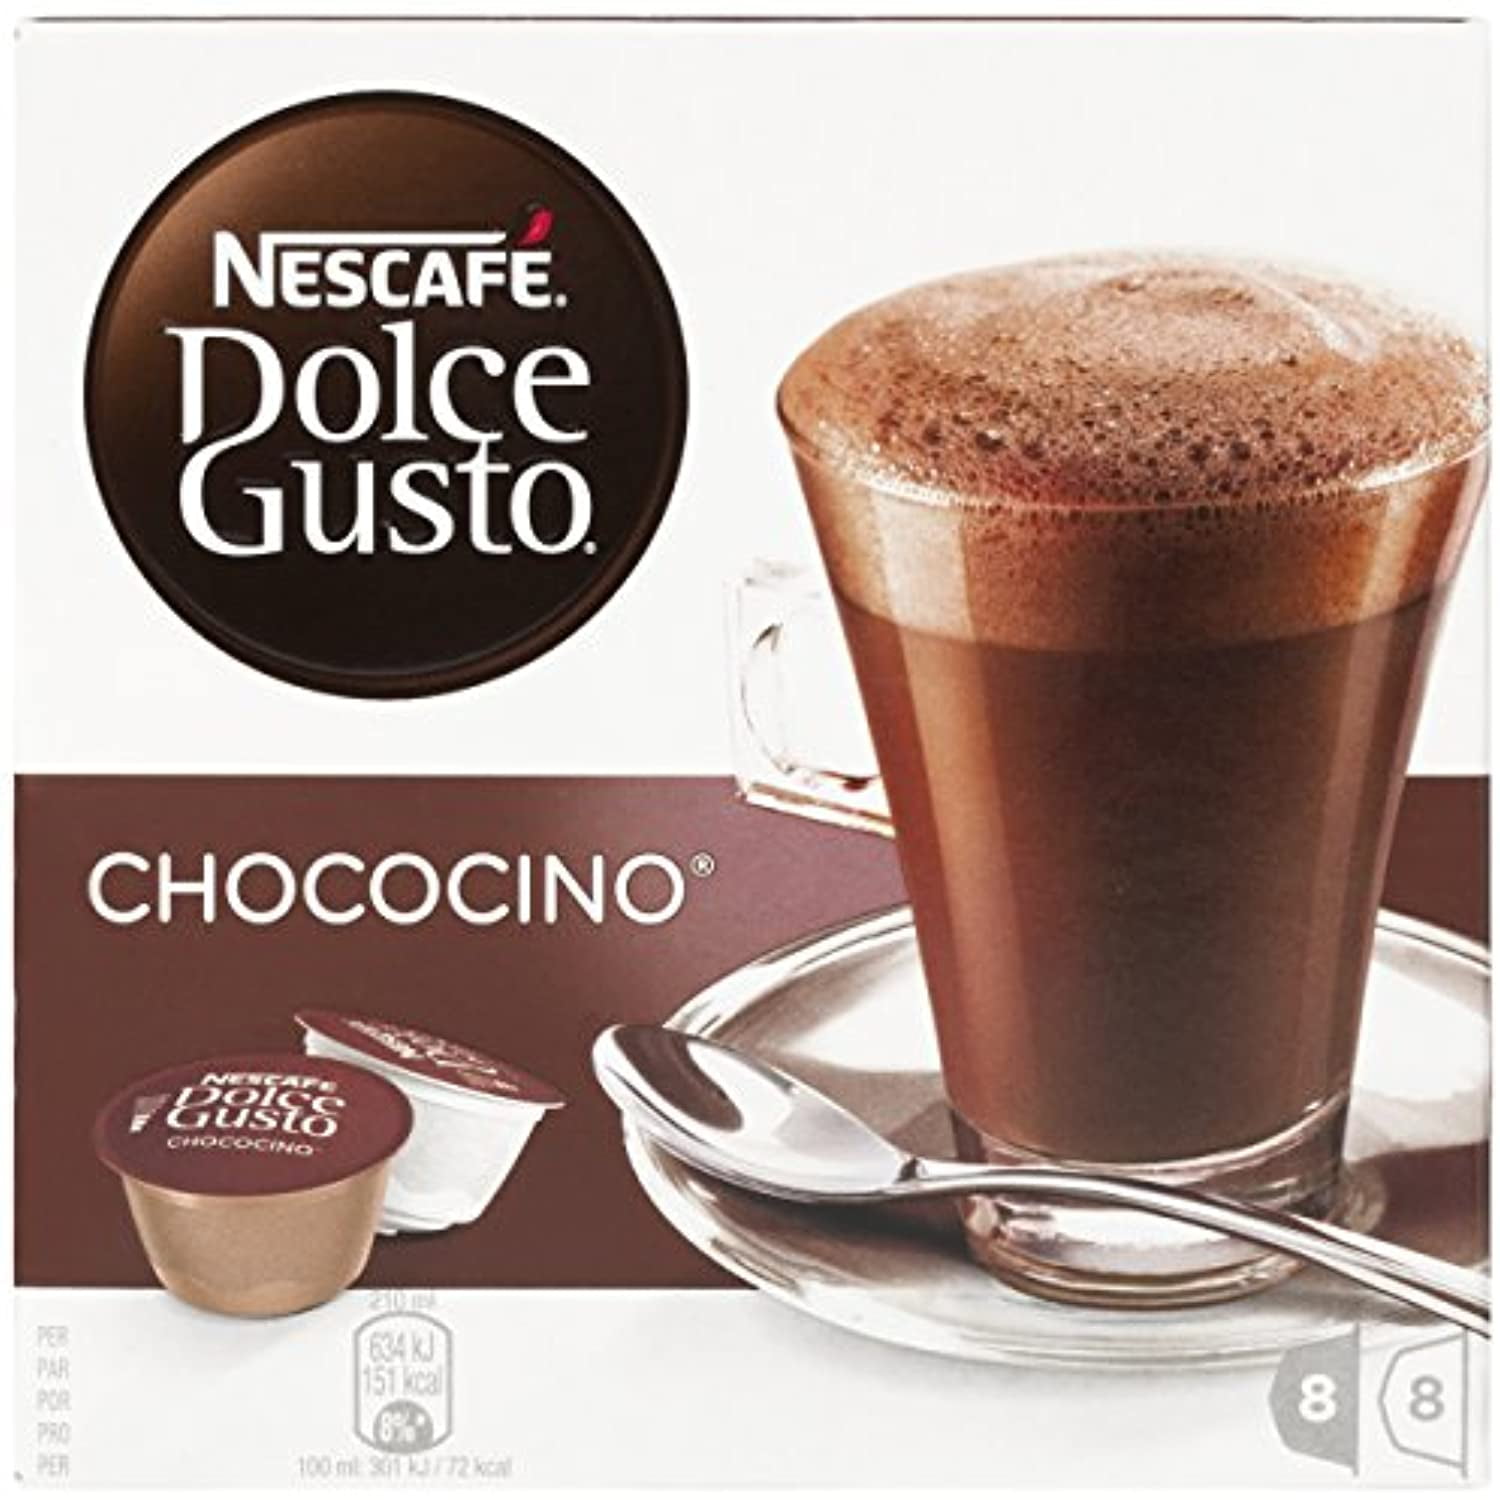 Nescafé Dolce Gusto Chococino 16 Capsules (Pack Of 3, Total 48